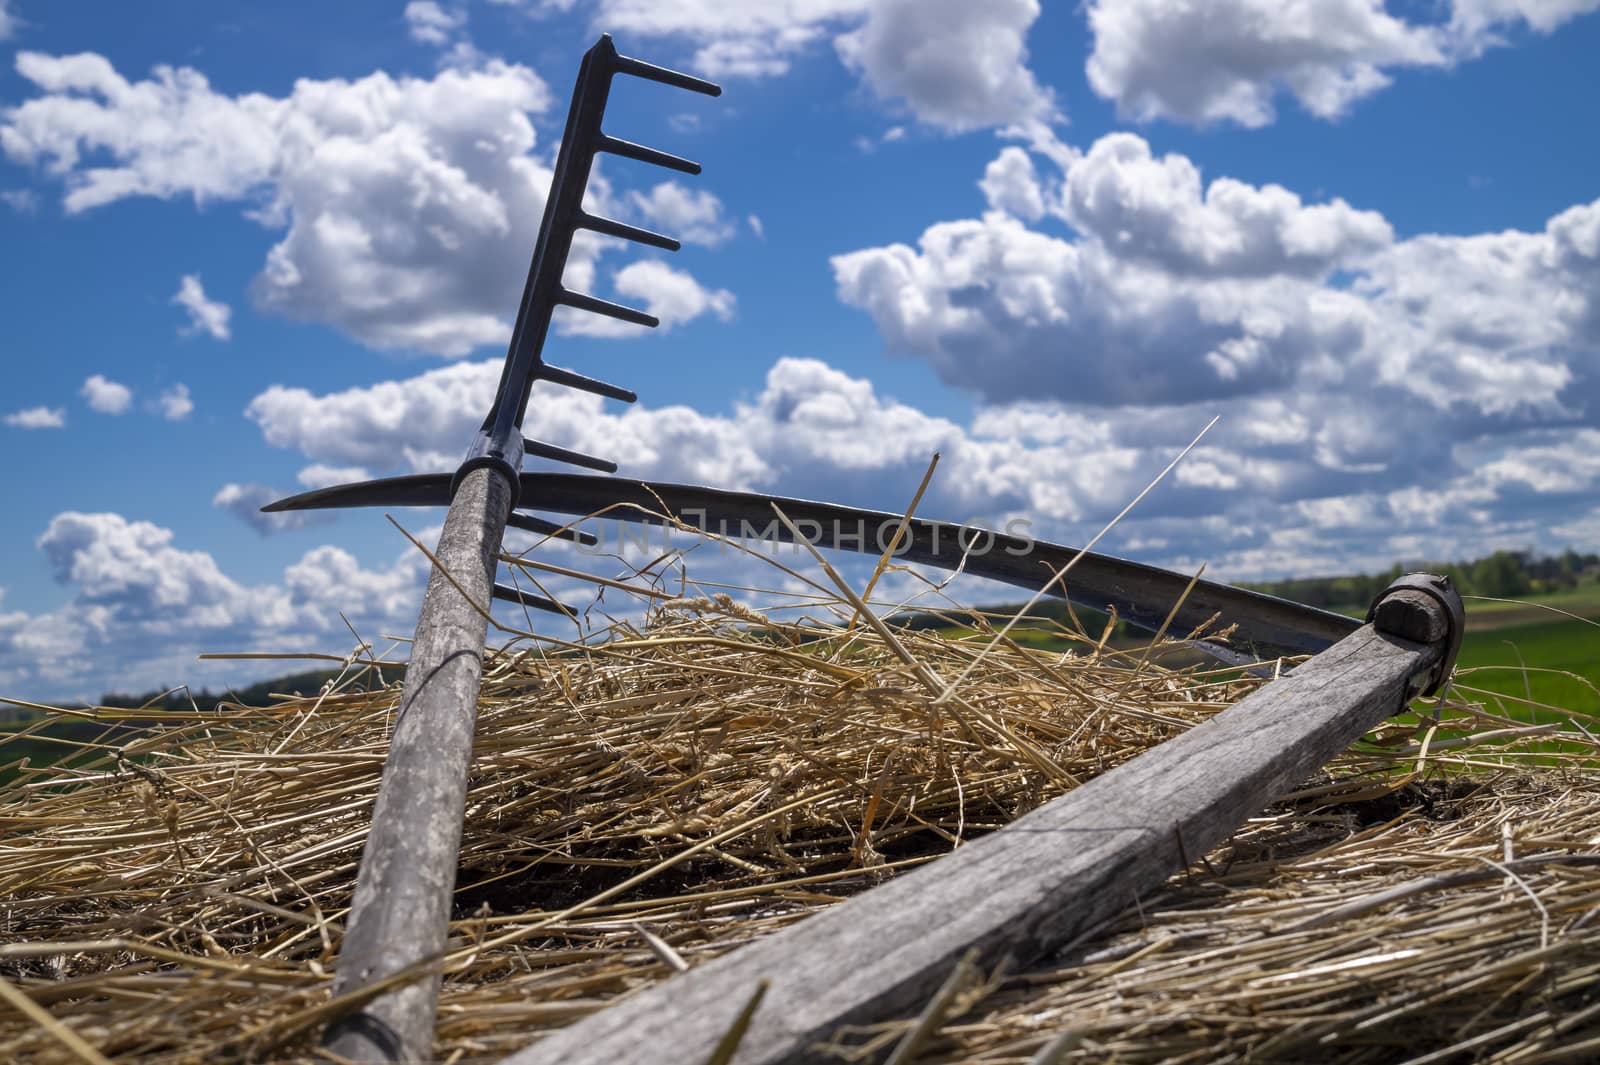 Rake and scythe on dried straw against a sunny blue sky with white clouds